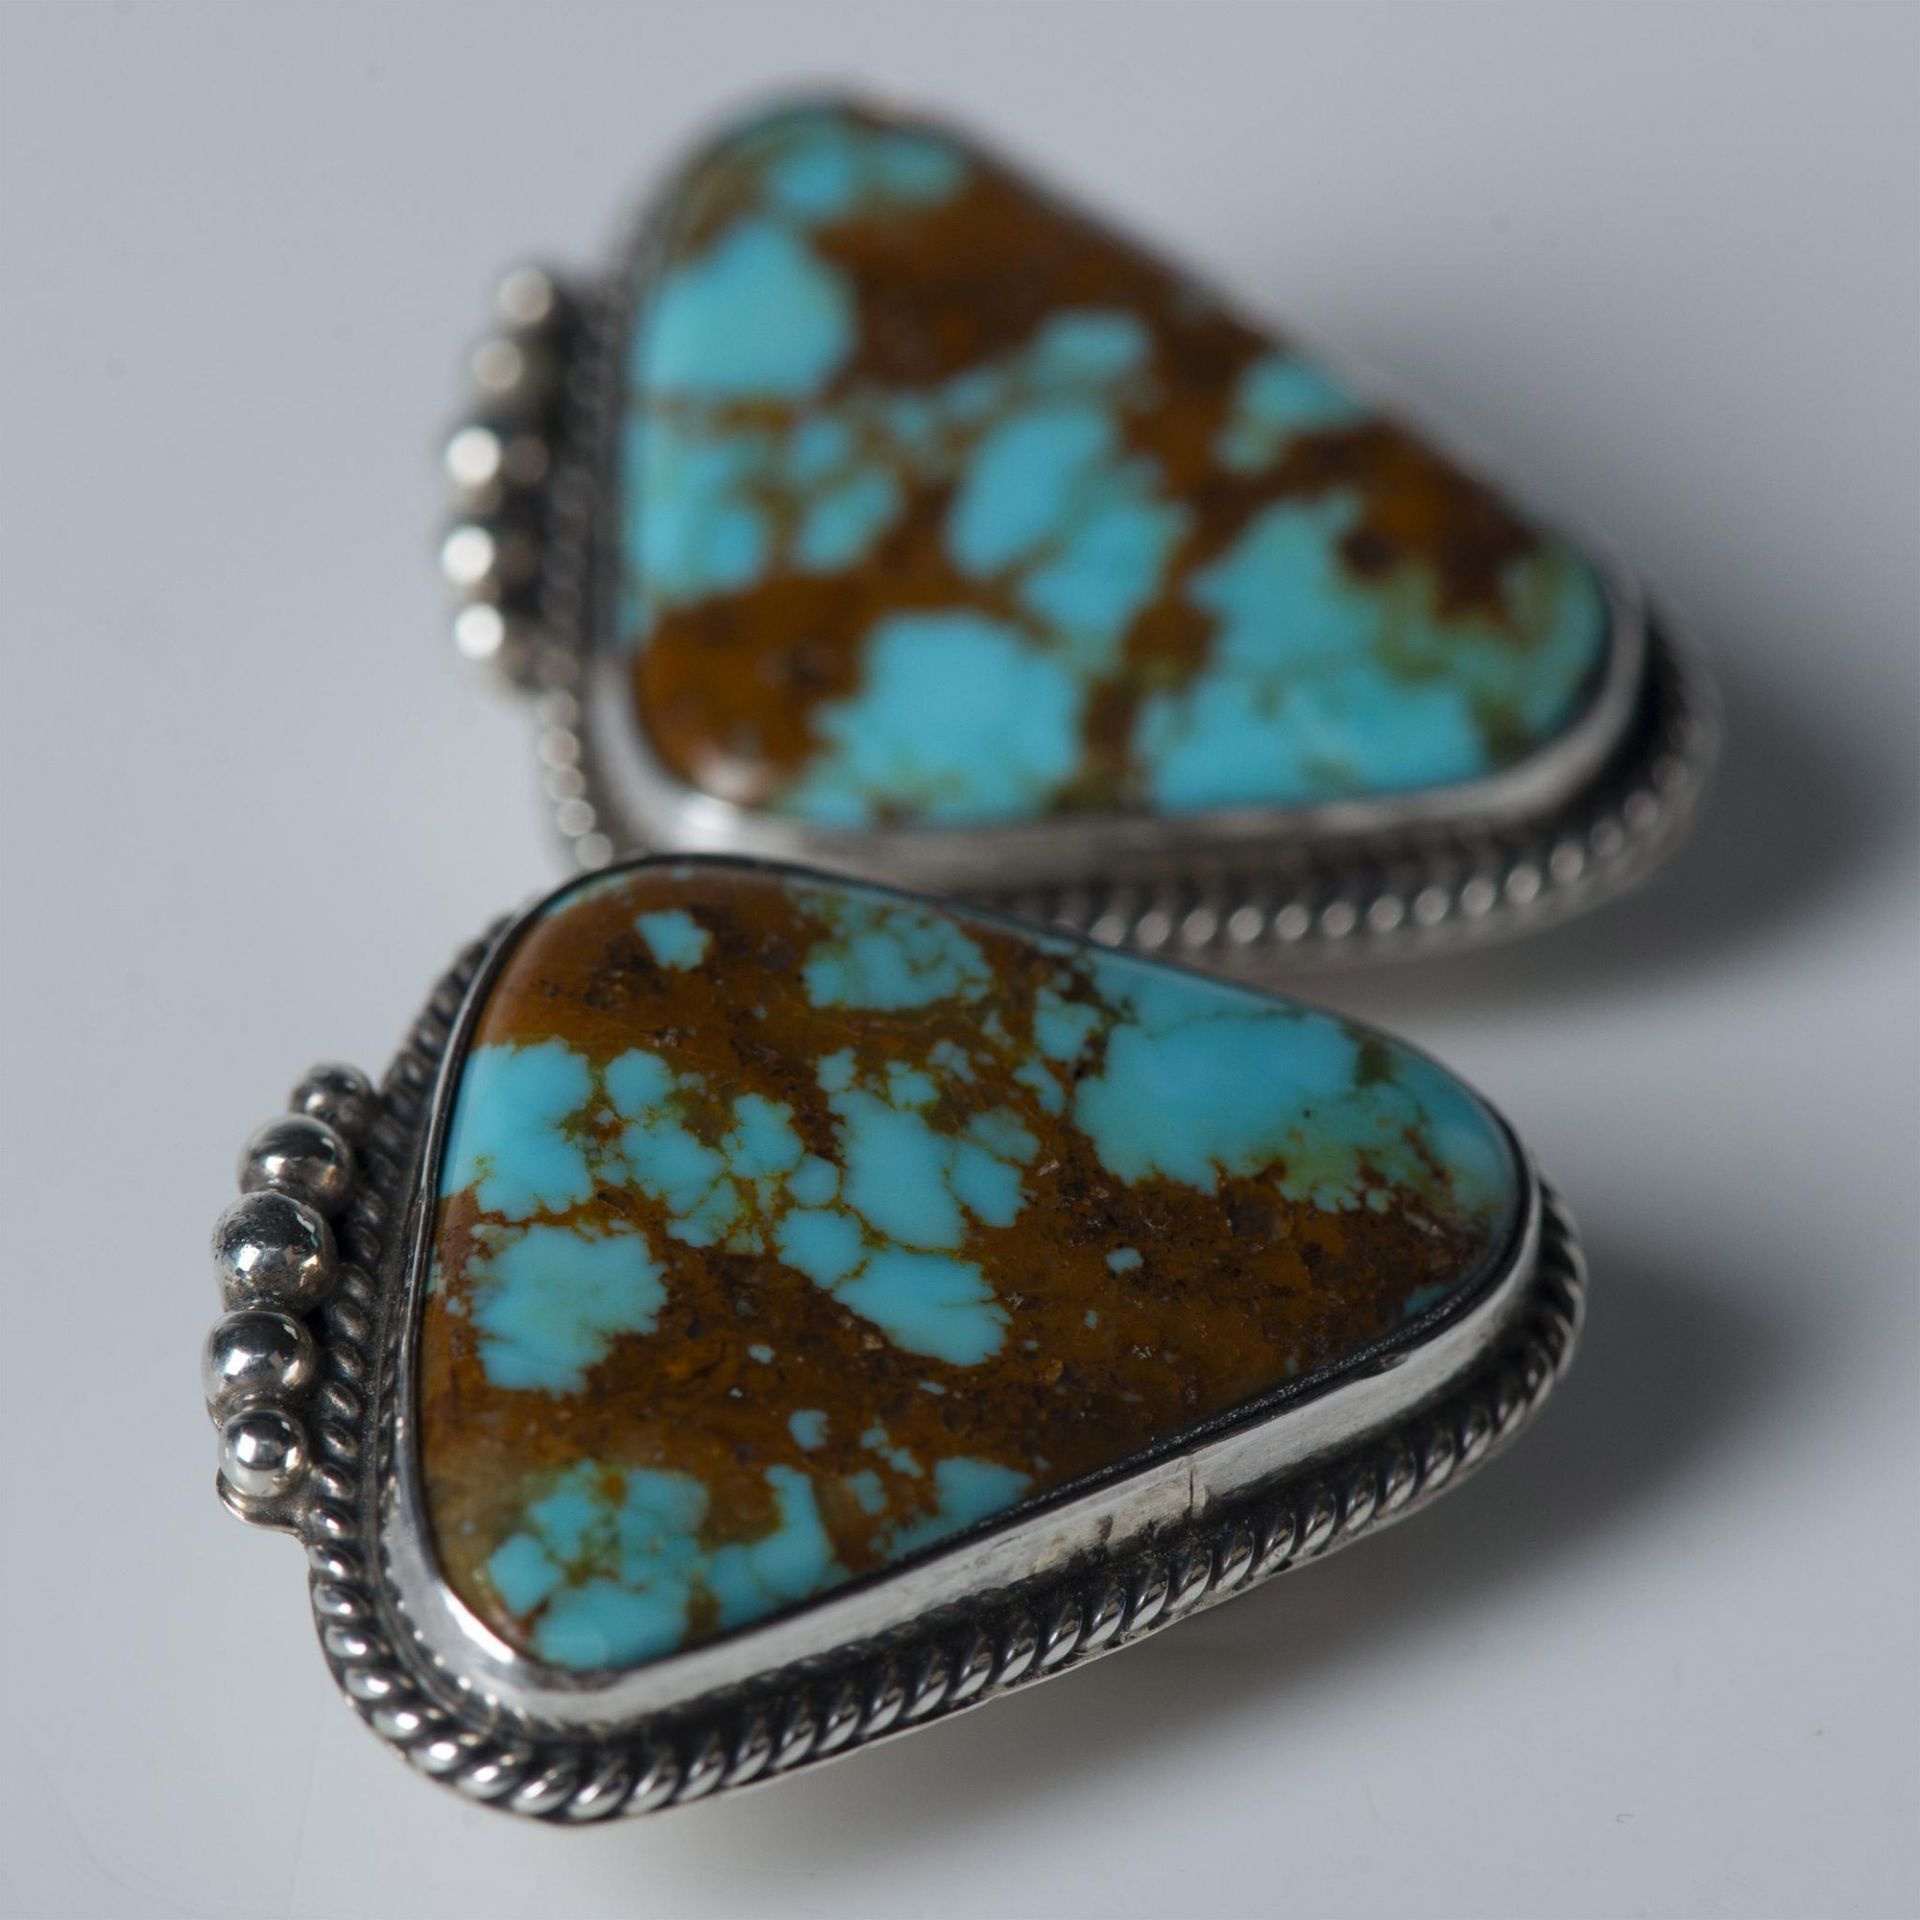 H. Piasso Navajo Sterling Silver & Turquoise Clip Earrings - Image 3 of 4